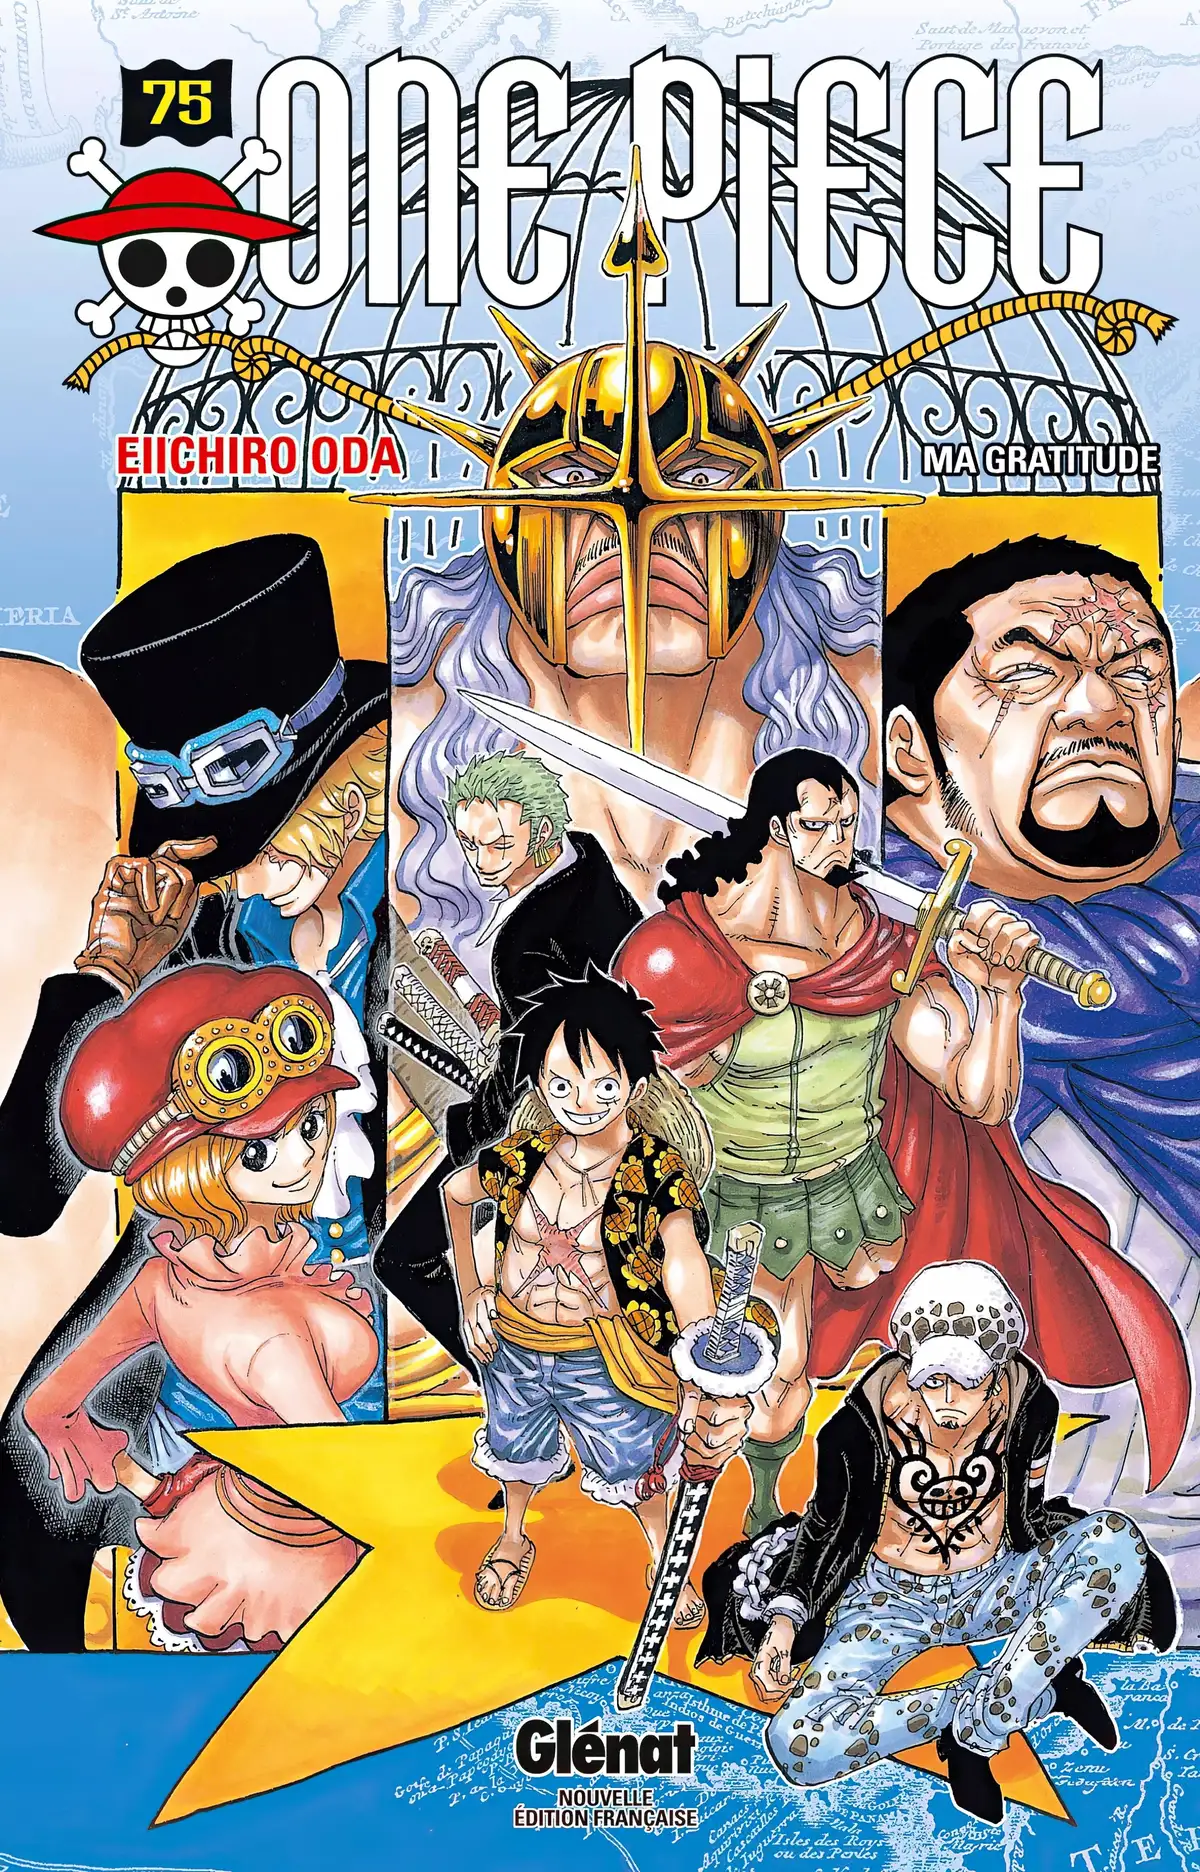 One Piece Volume 75 page 1